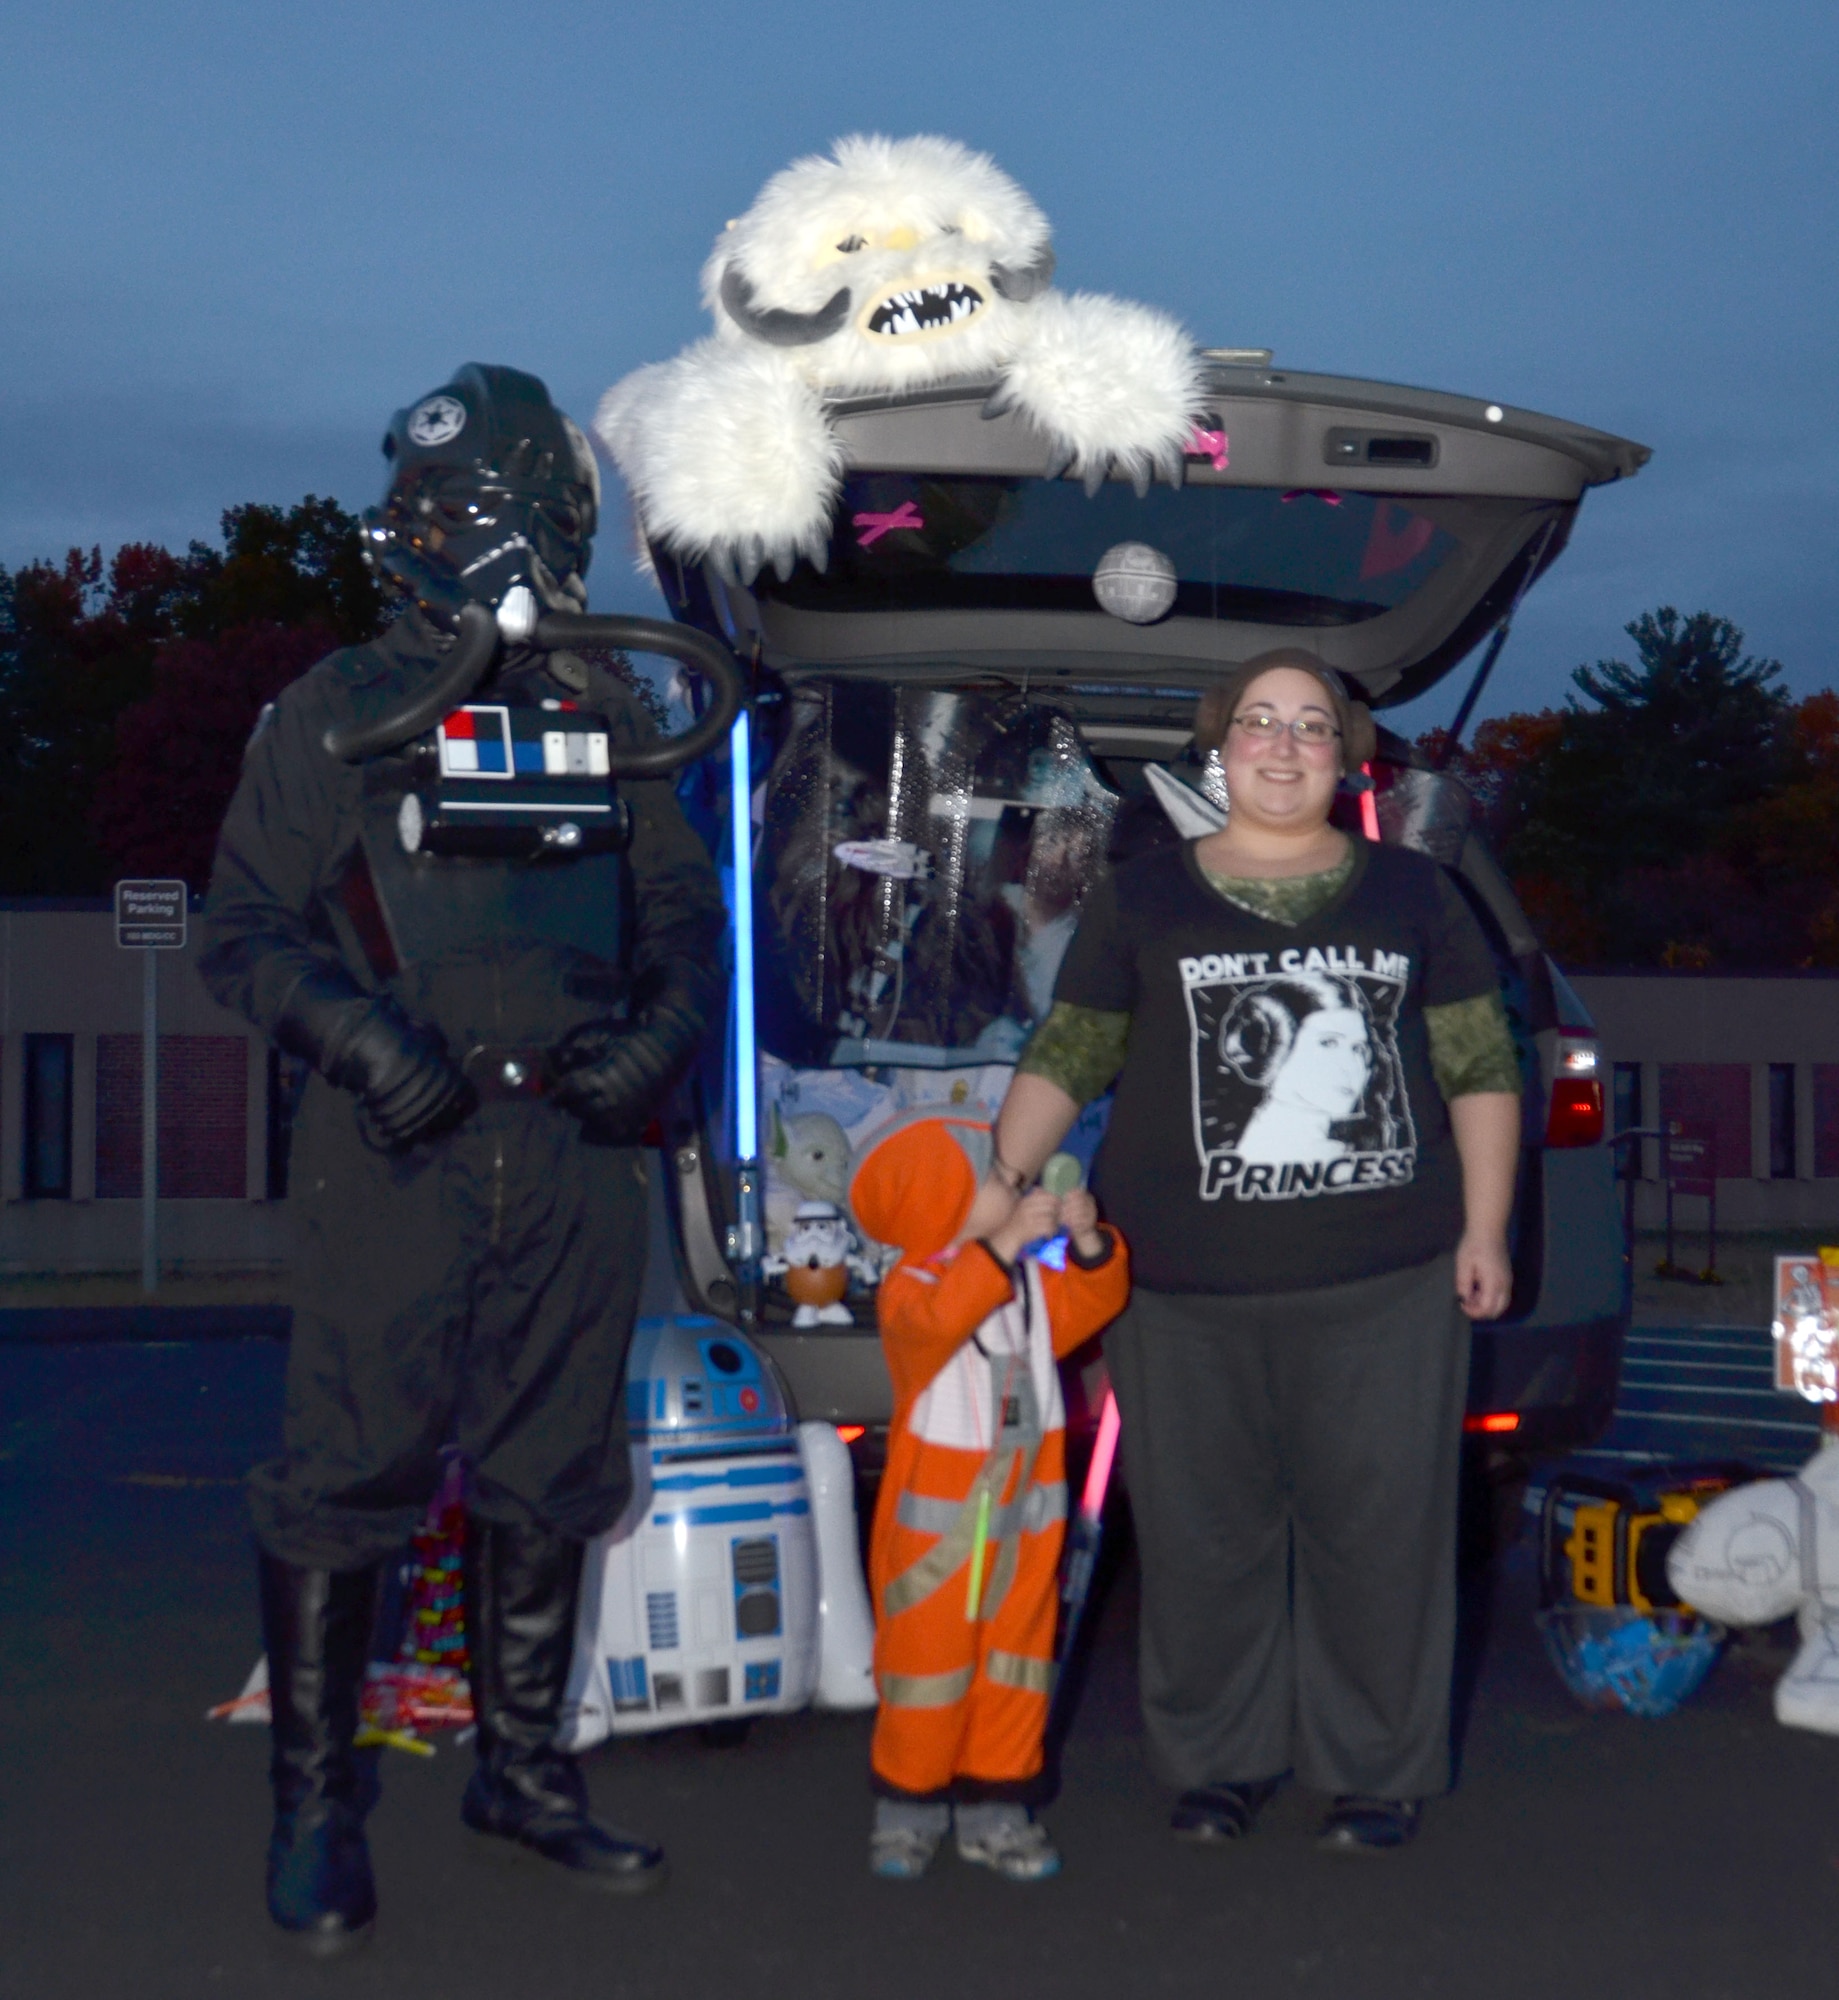 Staff Sgt. Brian Koehler, a supply sergeant with the Connecticut Army National Guard, dressed as a “Tie Fighter pilot”, and Jessica Koehler, family assistance center specialist, dressed in “Princess Leia” gear, pose with their son Owen, 4, who is dressed as an “X-Wing Fighter pilot” during the Child and Youth Program’s Trunk or Treat event held at Bradley Air National Guard Base, East Granby, Conn., Oct. 28, 2014.  . (U.S. Air National Guard photo by Tech. Sgt. Joshua Mead)